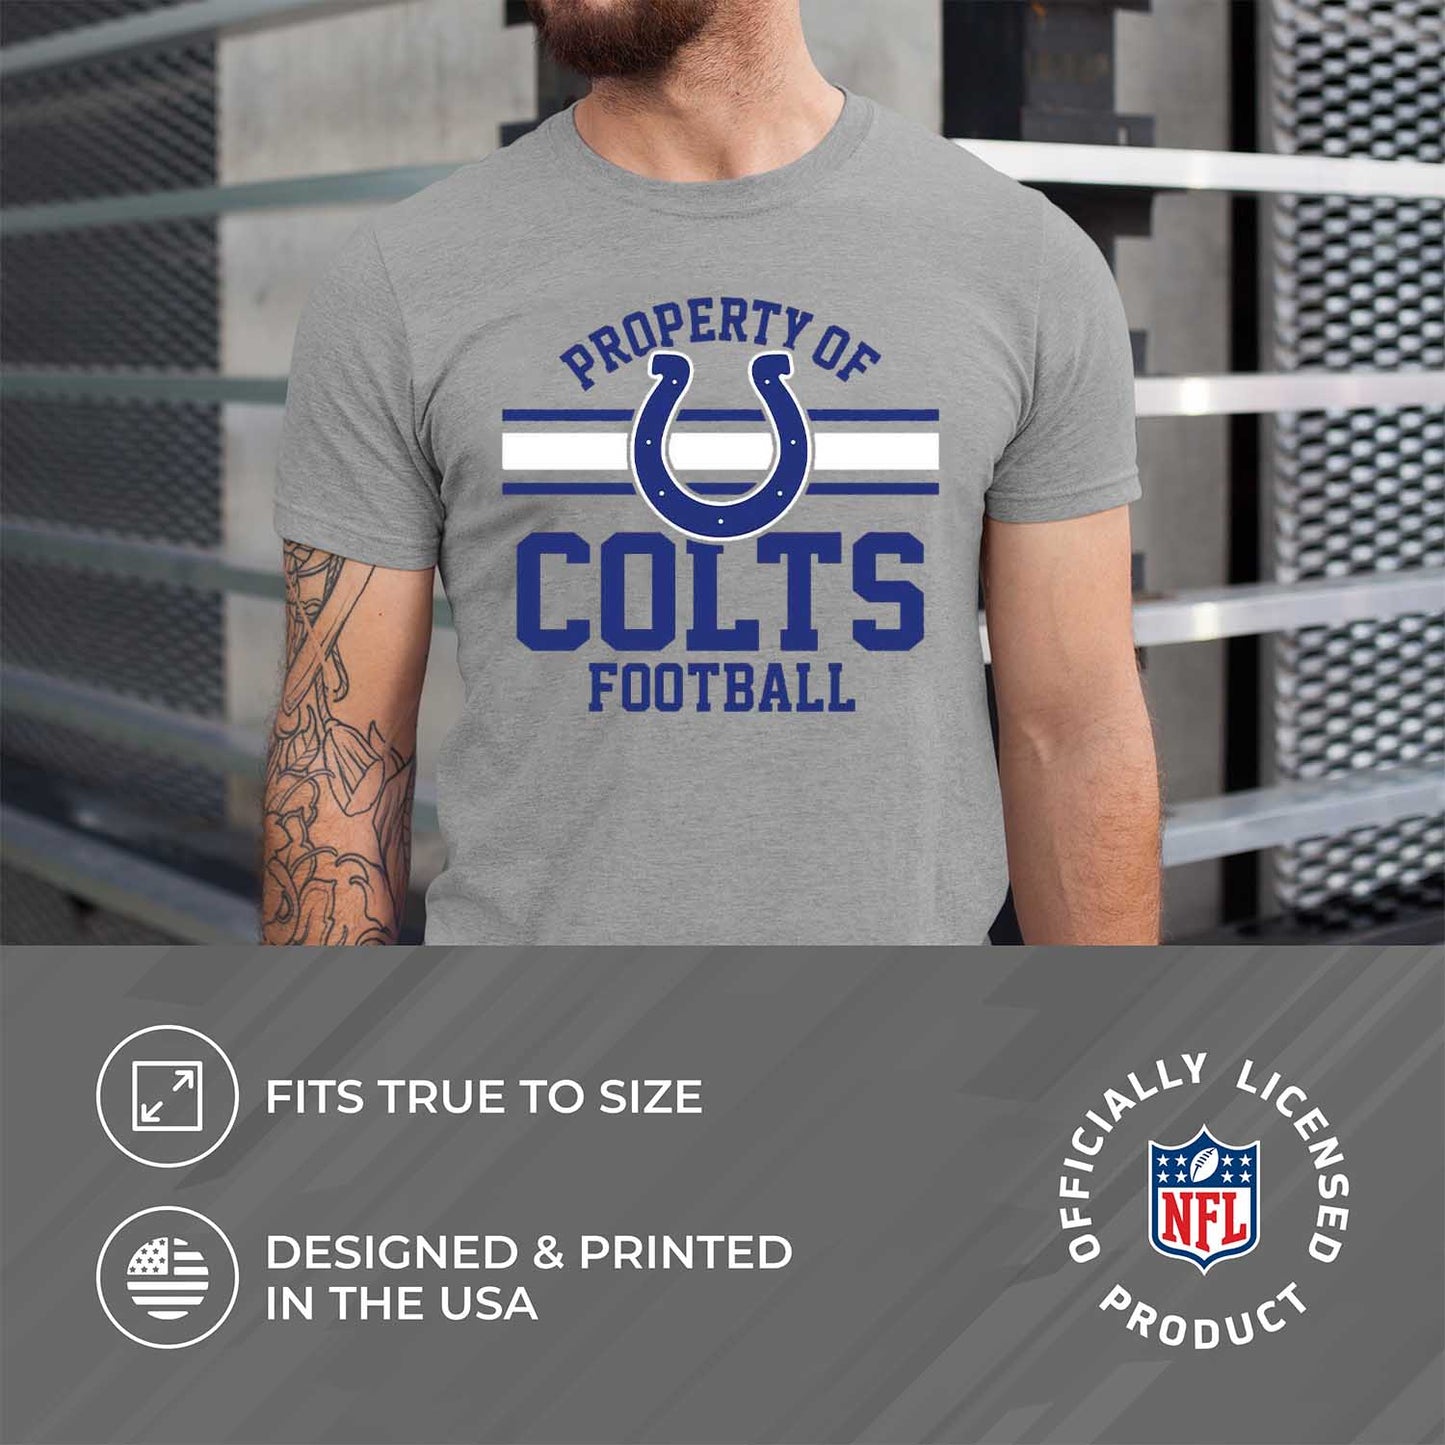 Indianapolis Colts NFL Adult Property Of T-Shirt - Sport Gray